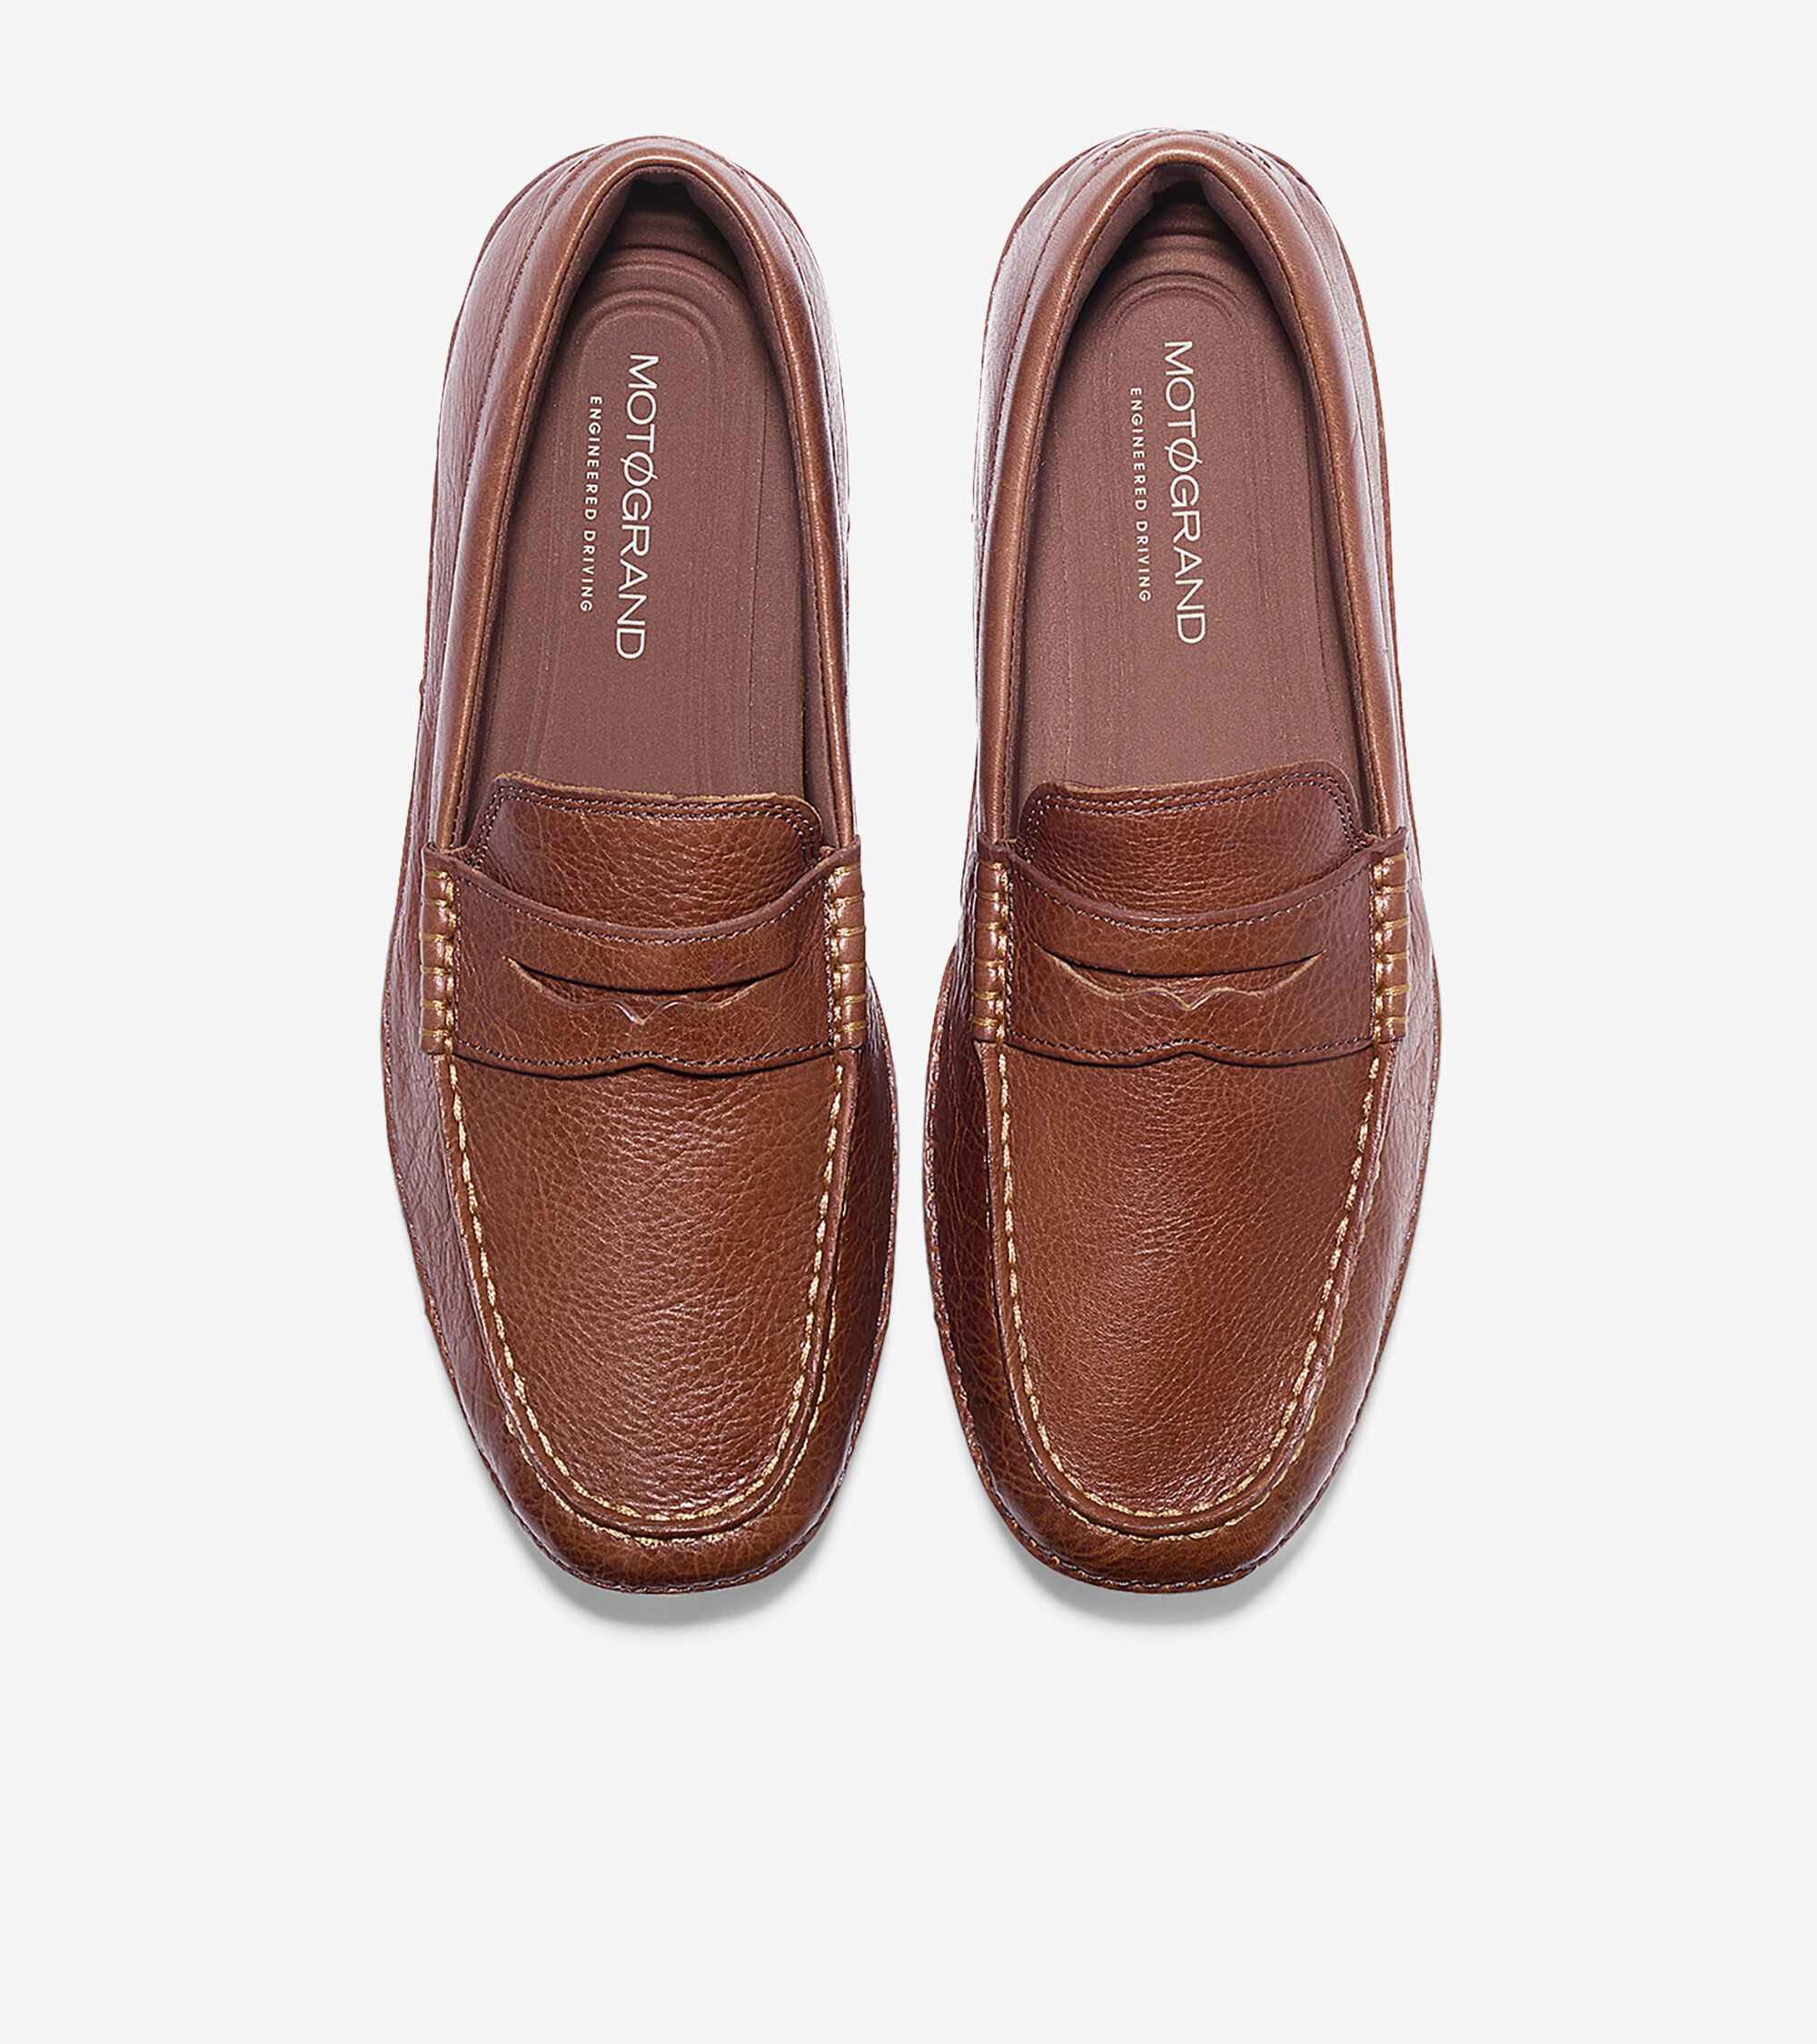 cole haan driver shoes